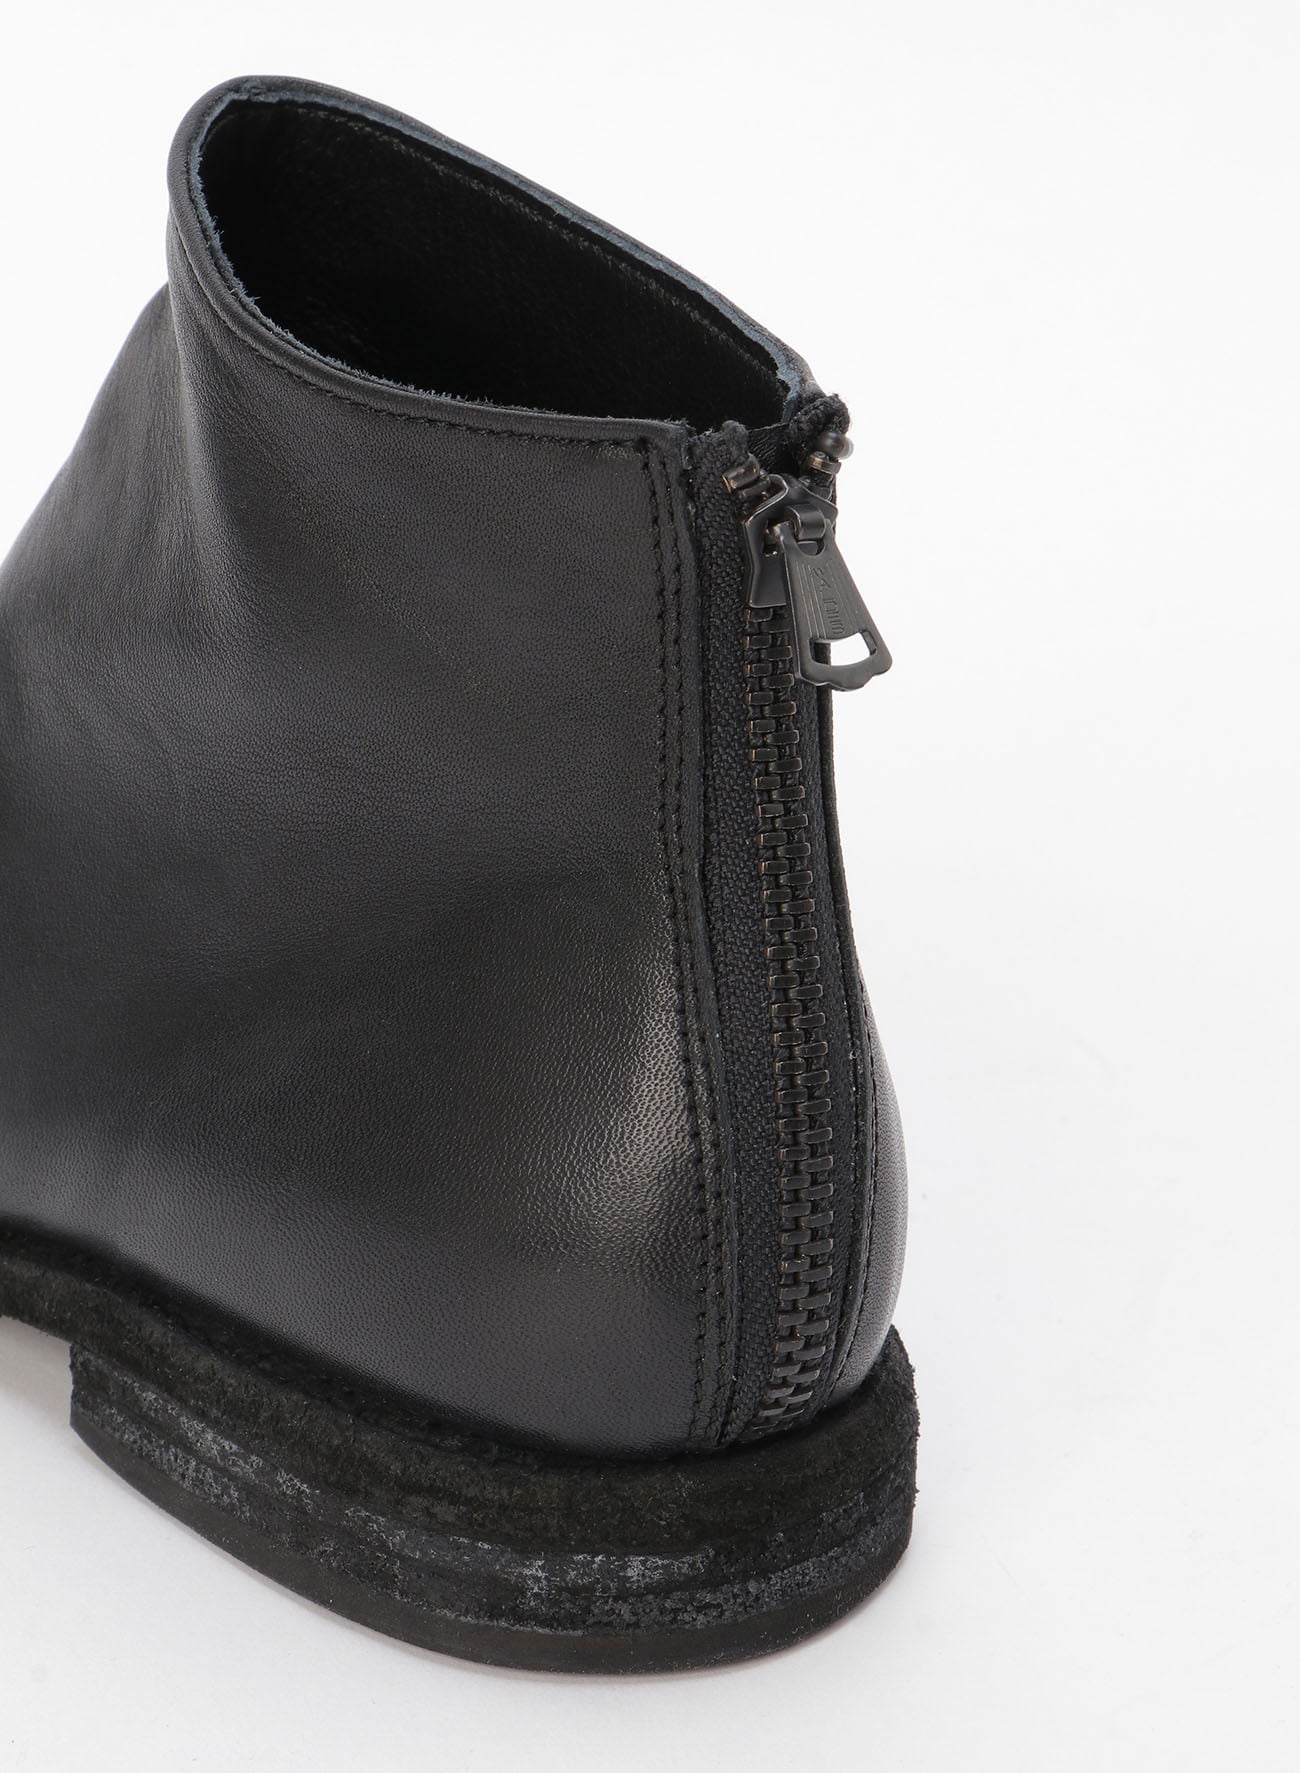 SOFT LEATHER LOW CUT BOOTS WITH BACK ZIPPER(US 3.5 Black): Vintage 1.1｜THE  SHOP YOHJI YAMAMOTO